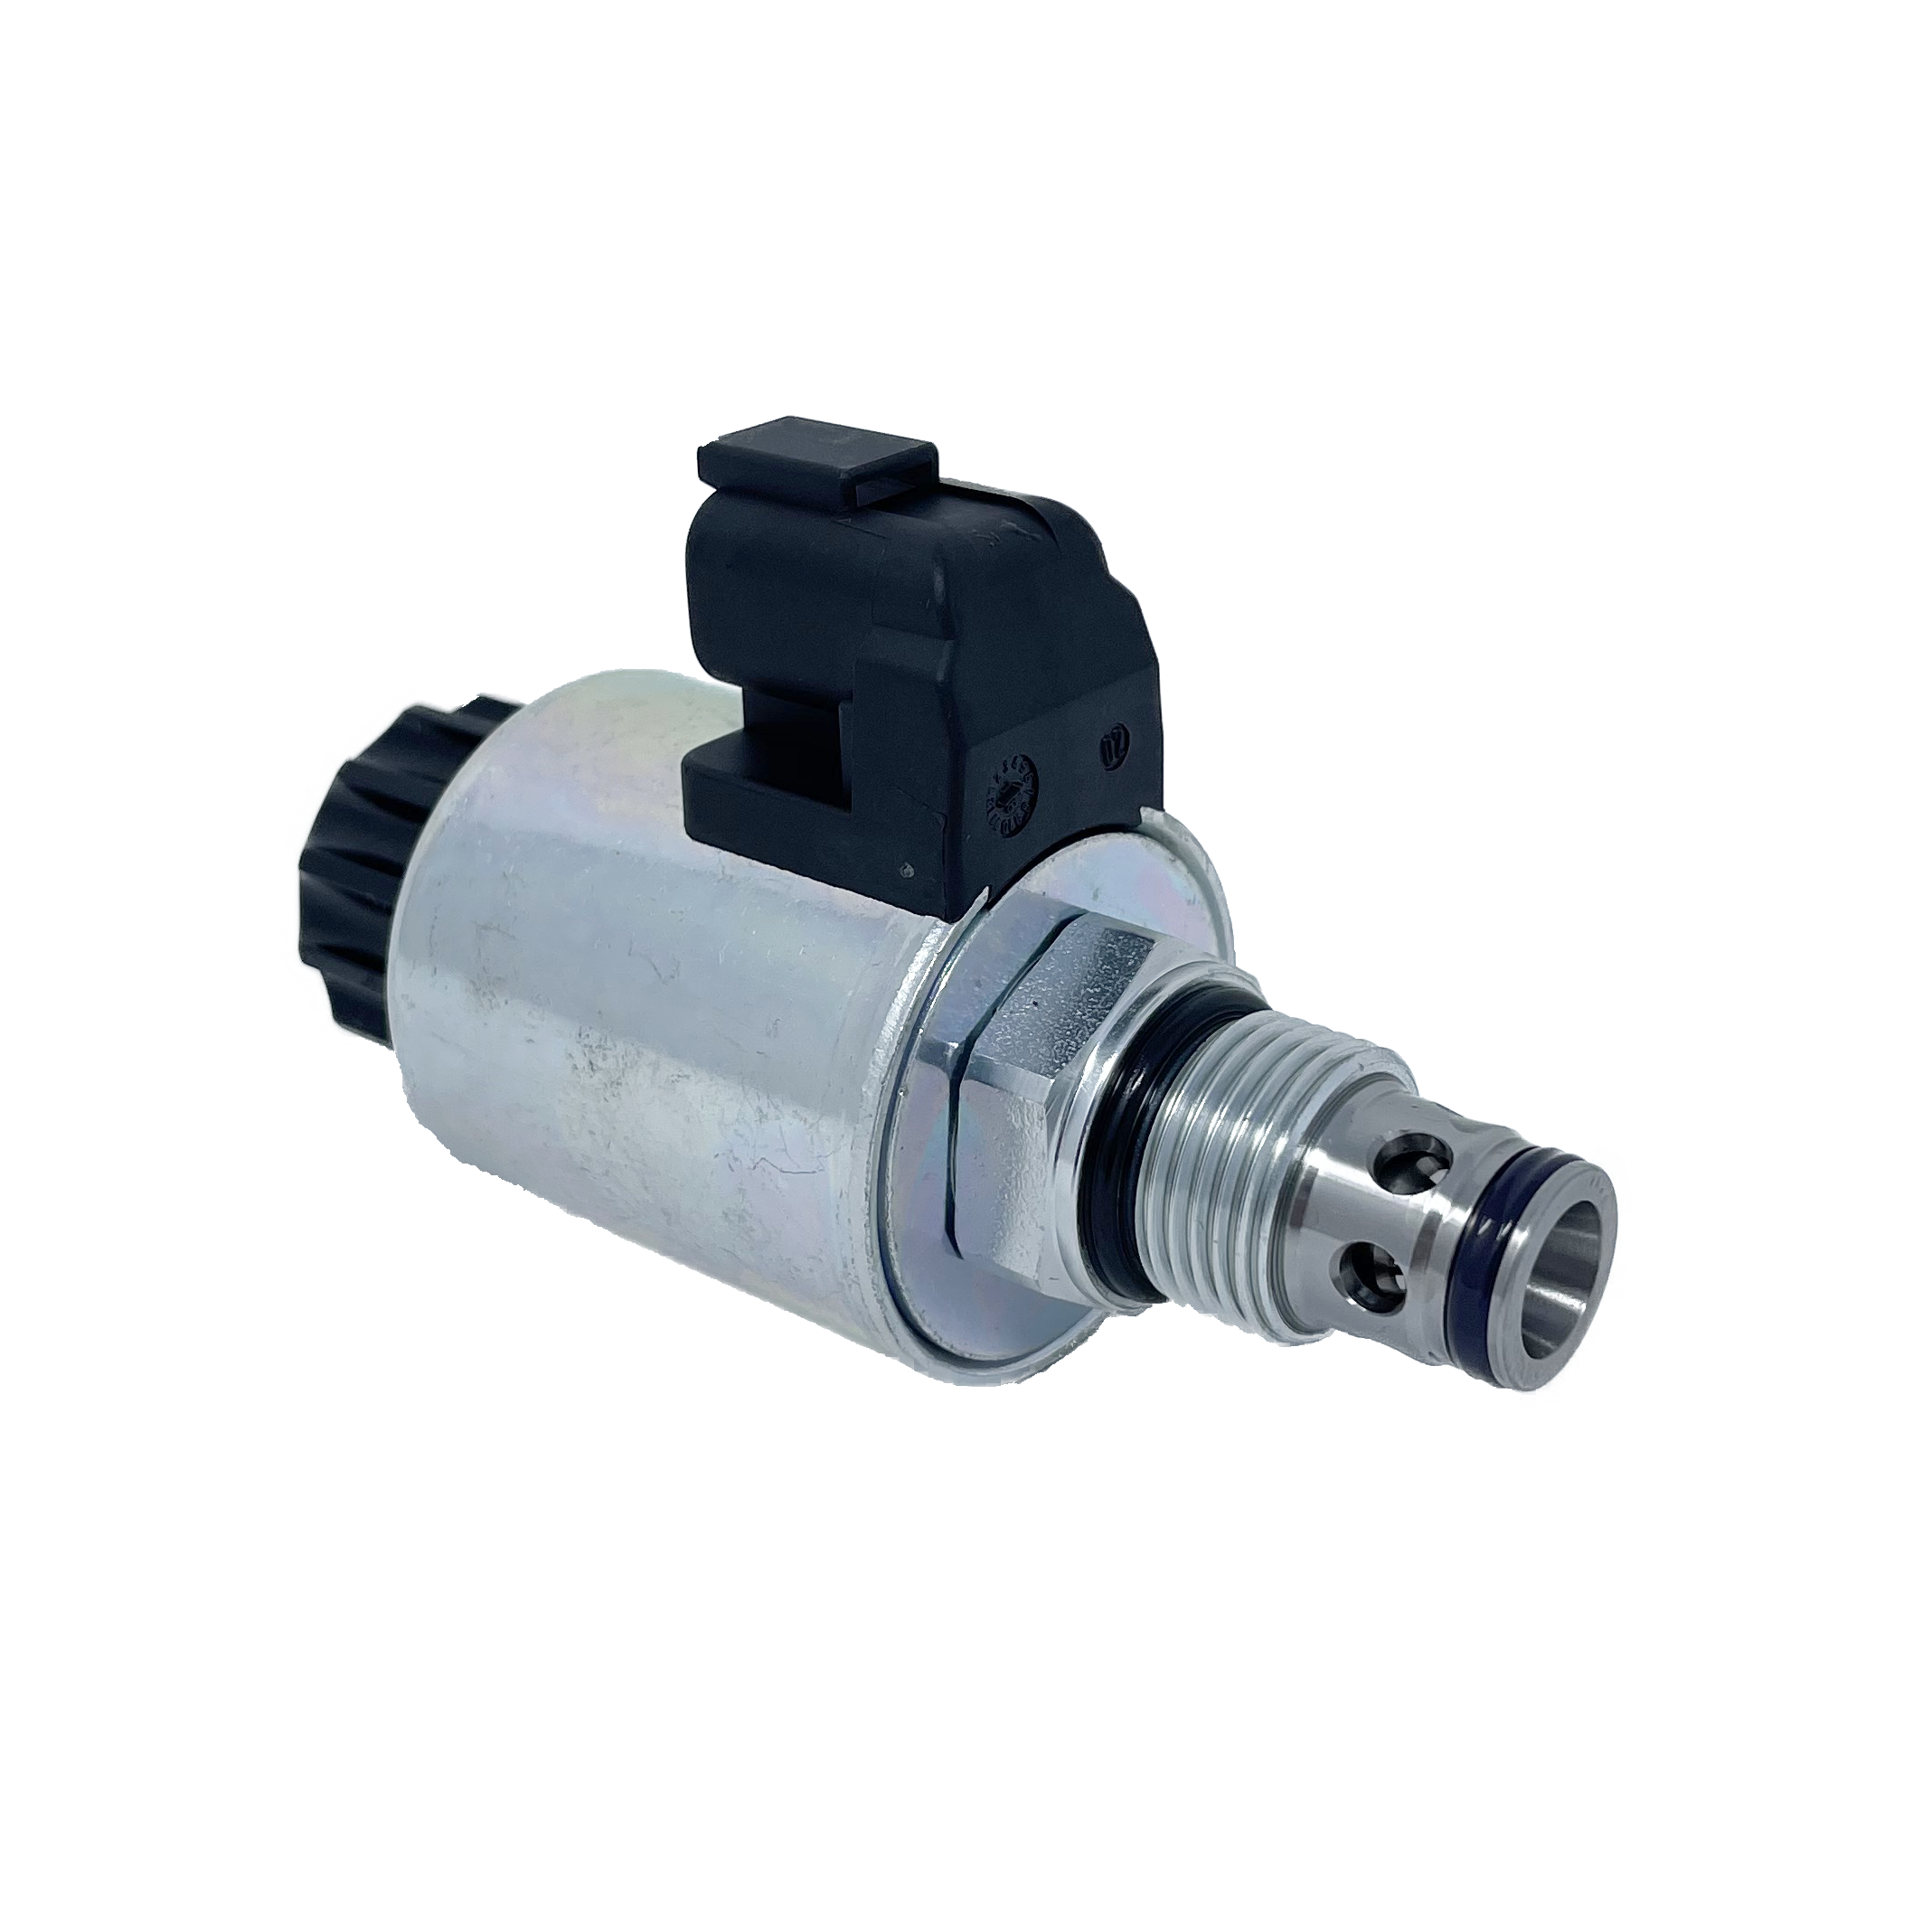 SD3E-B2/H2O2A12DT : Argo DCV, 16GPM, 5100psi, 2P2W, C-10-2, 12 VDC Deutsch, Flow 1 to 2 Neutral